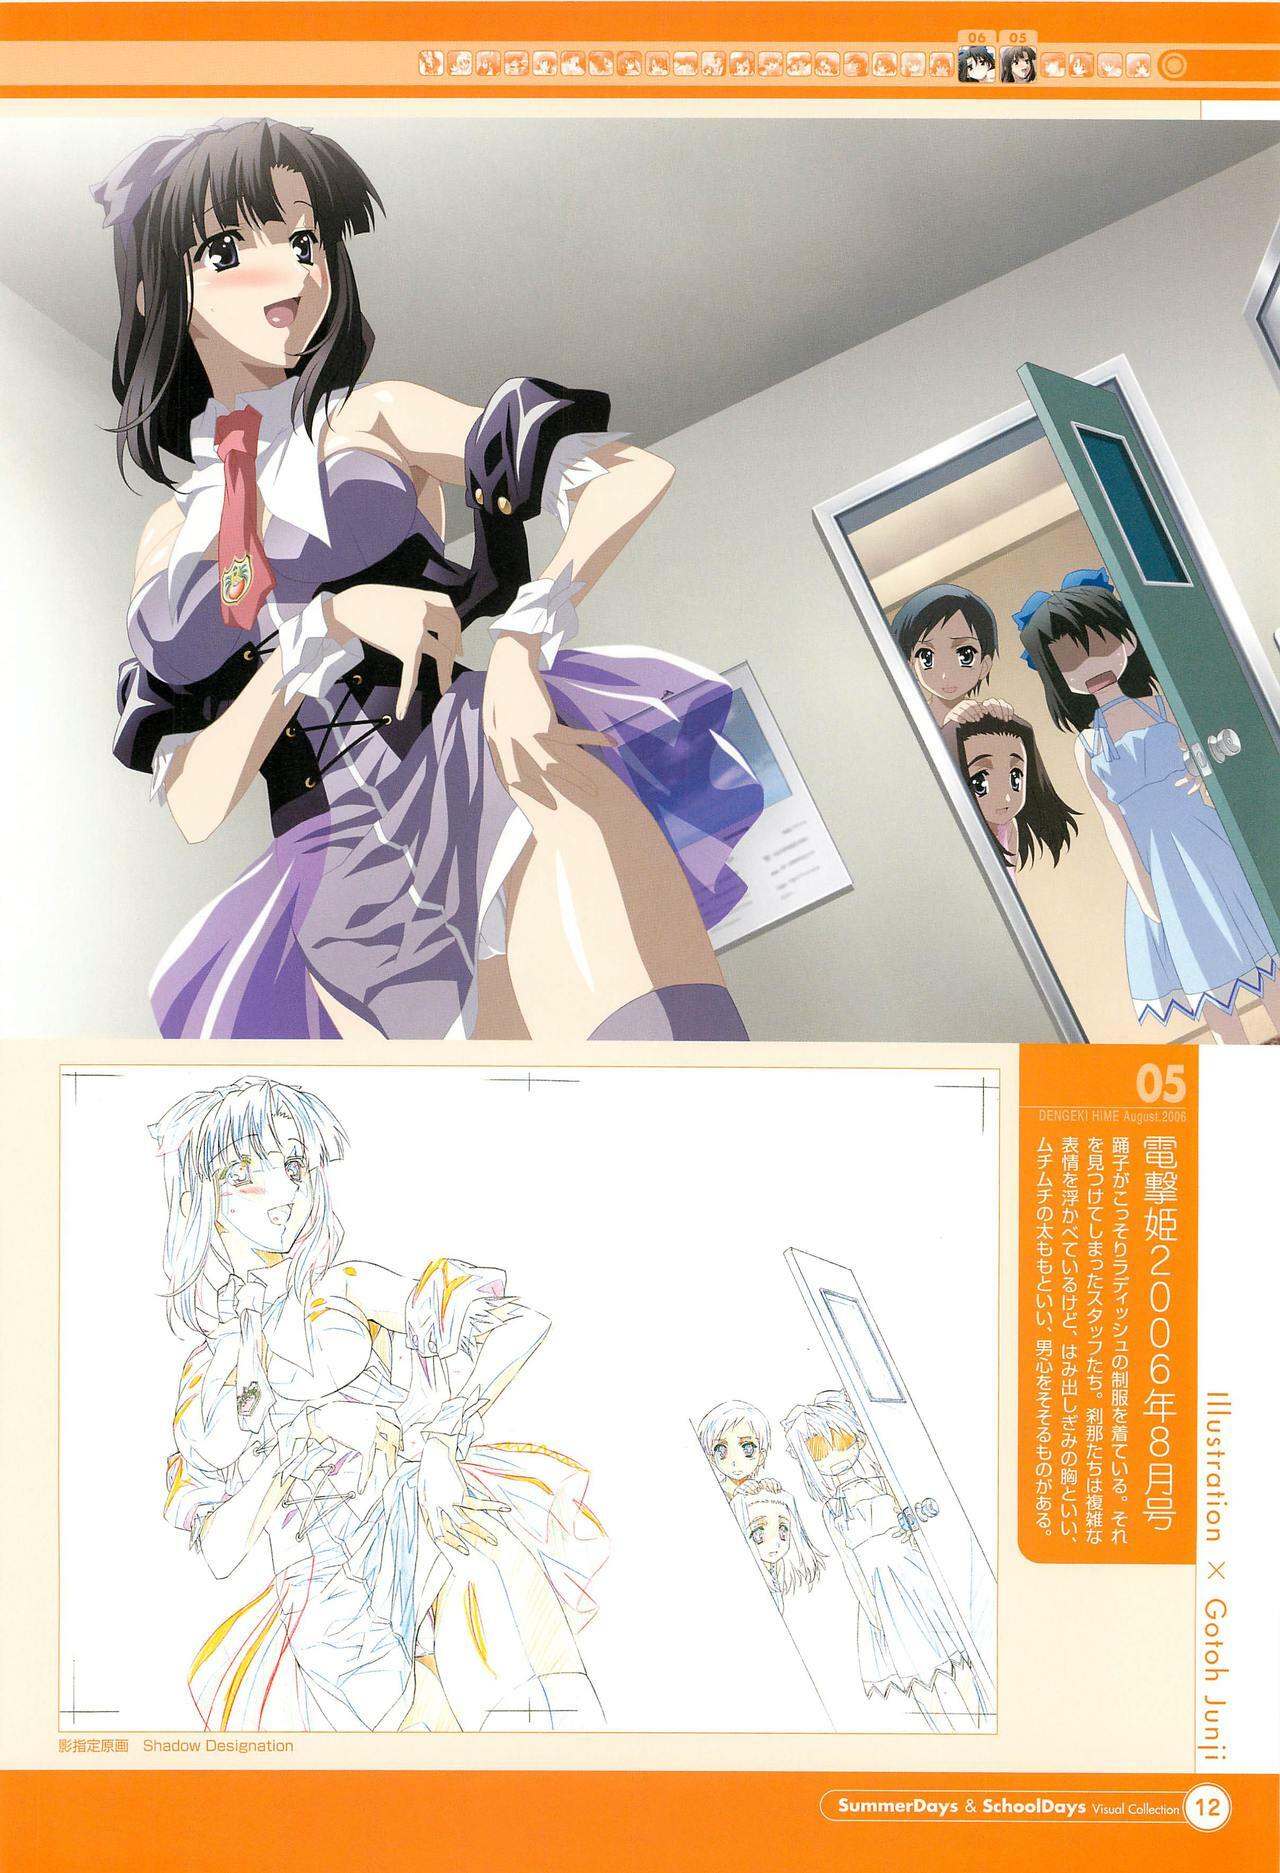 SummerDays & School Days Visual Collection page 14 full